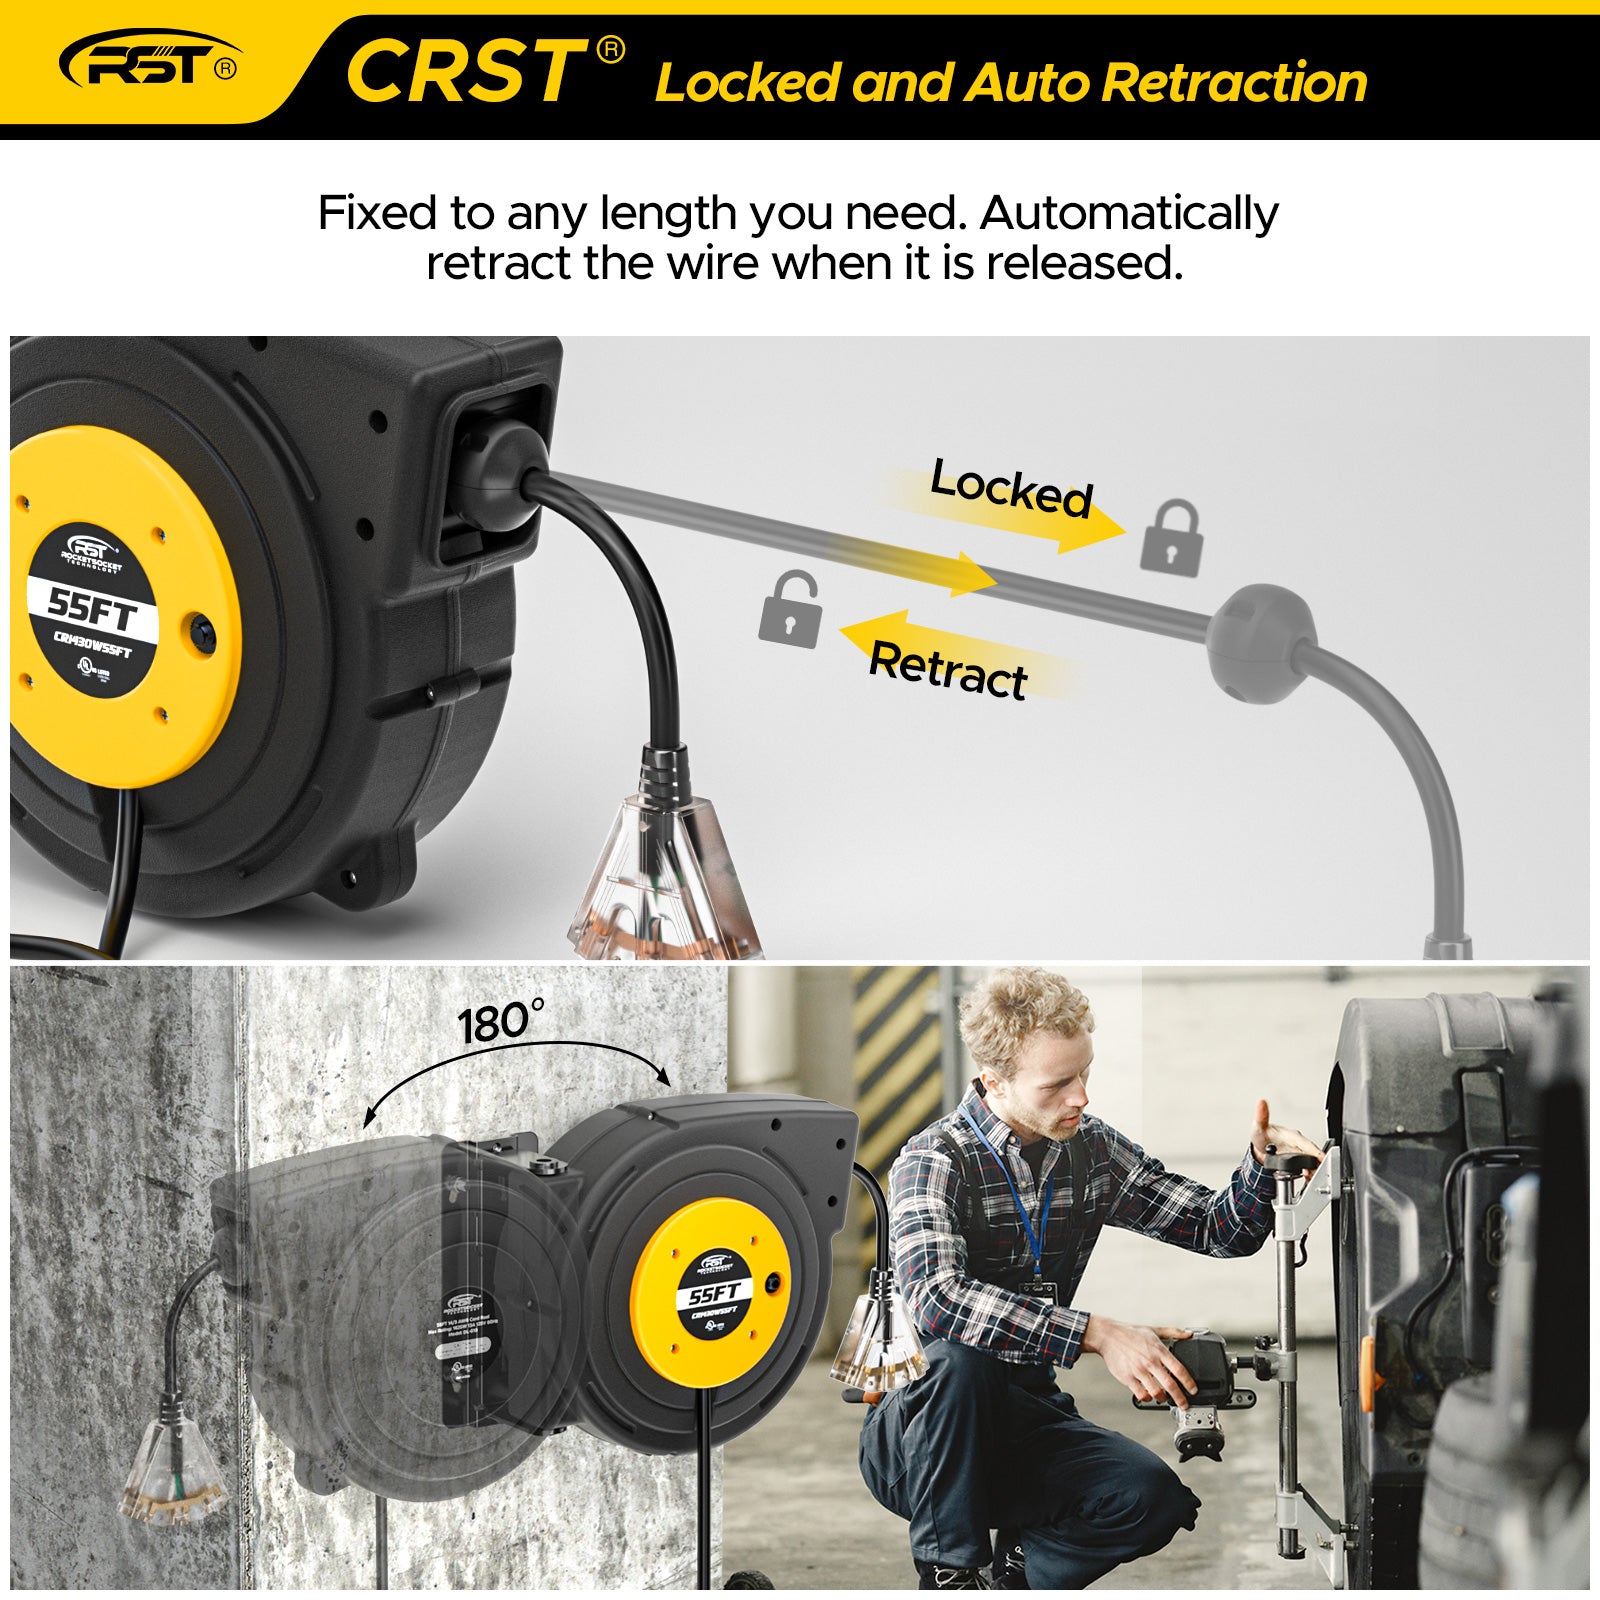 CRST 55FT Retractable Extension Power Cord Reel with Mounting Kits, Li –  Rocket Socket Technology